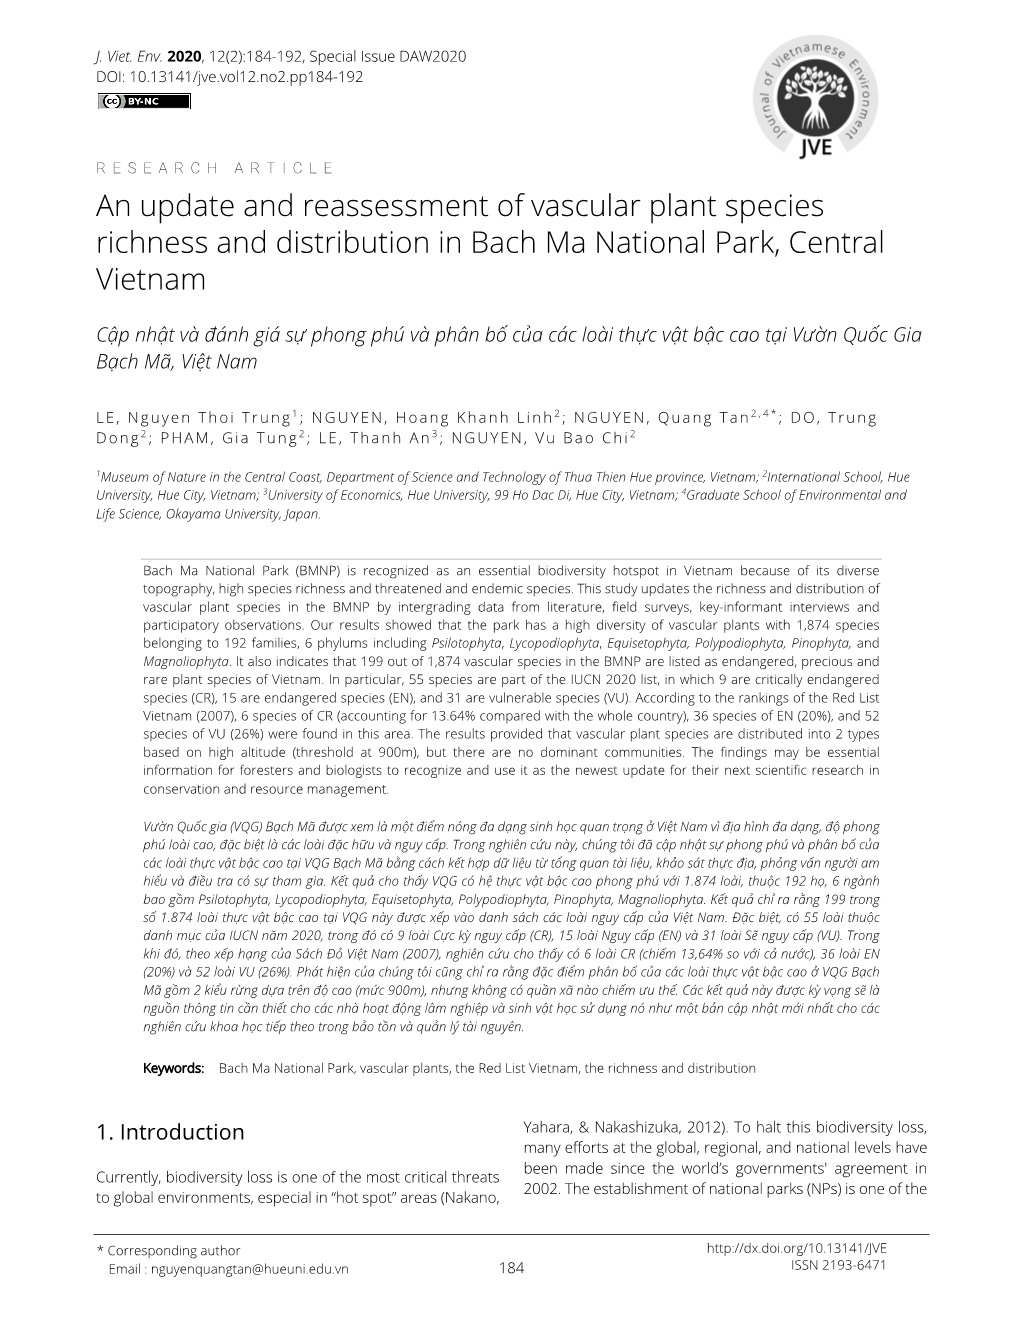 An Update and Reassessment of Vascular Plant Species Richness and Distribution in Bach Ma National Park, Central Vietnam